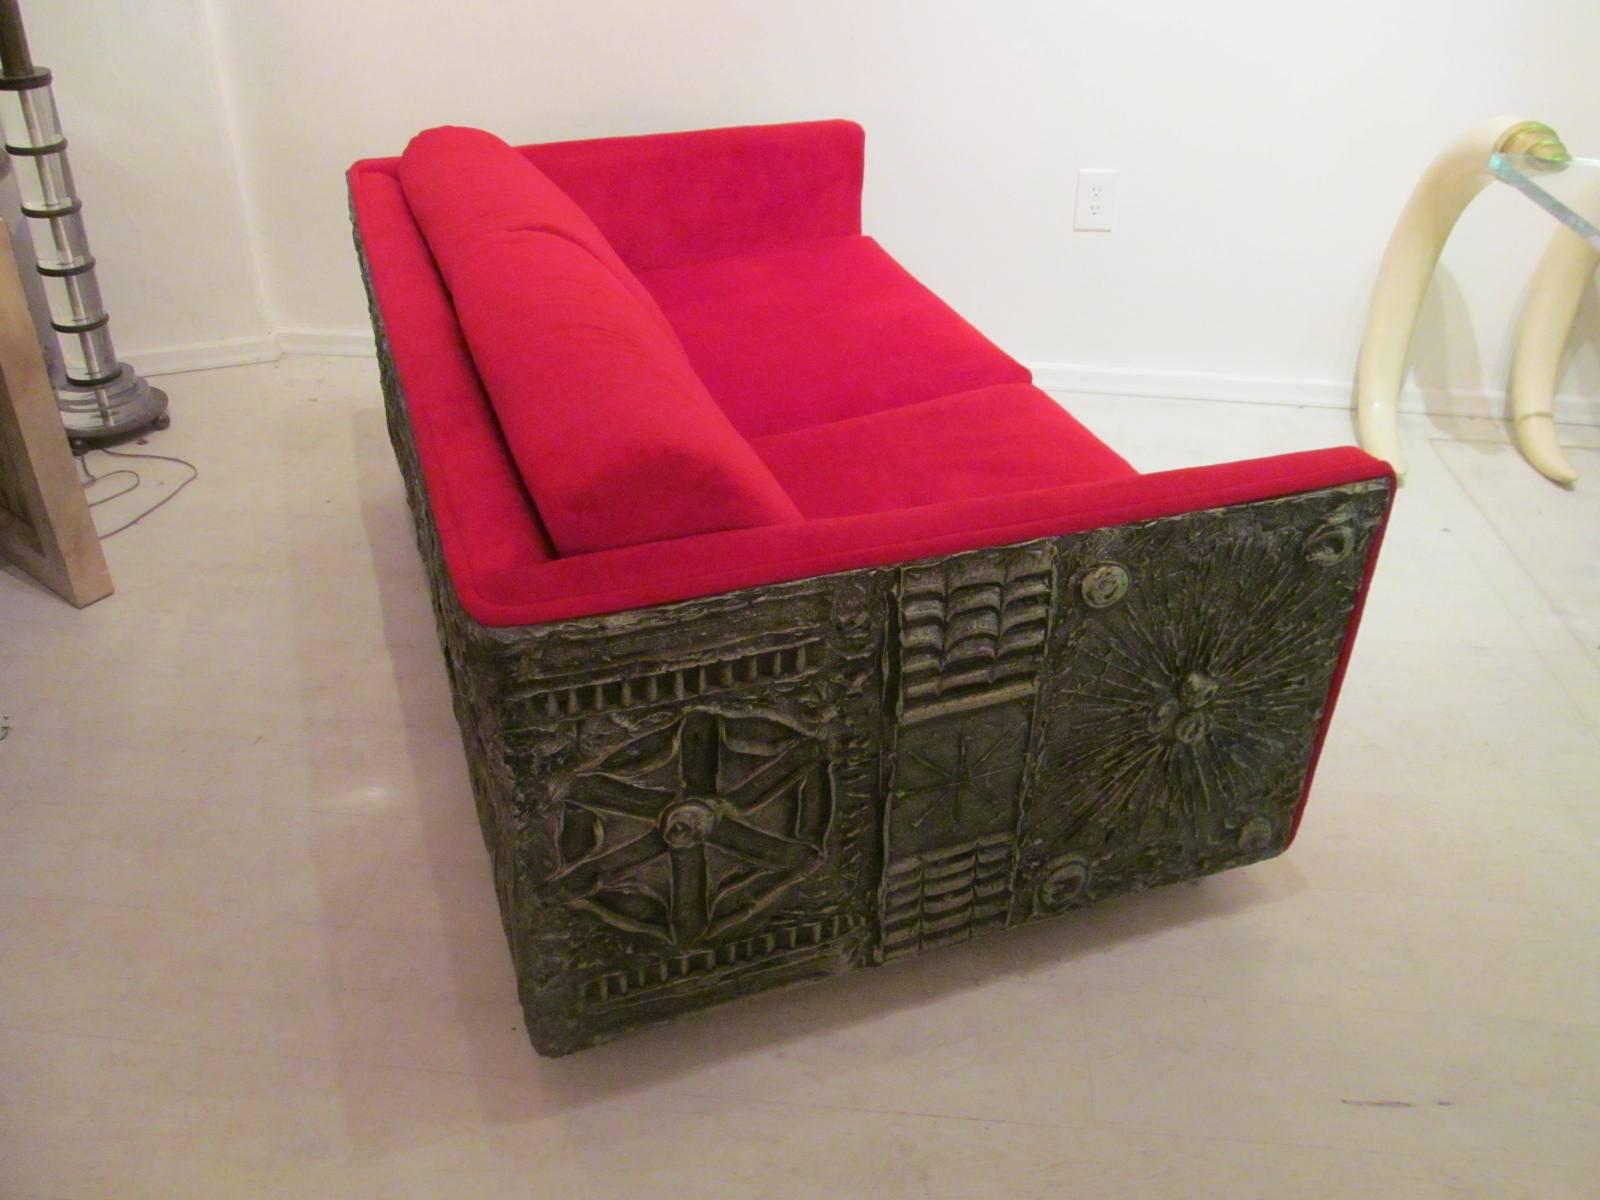 North American Brutalist Paul Evans Style Loveseat by Adrian Pearsall for Craft Associates